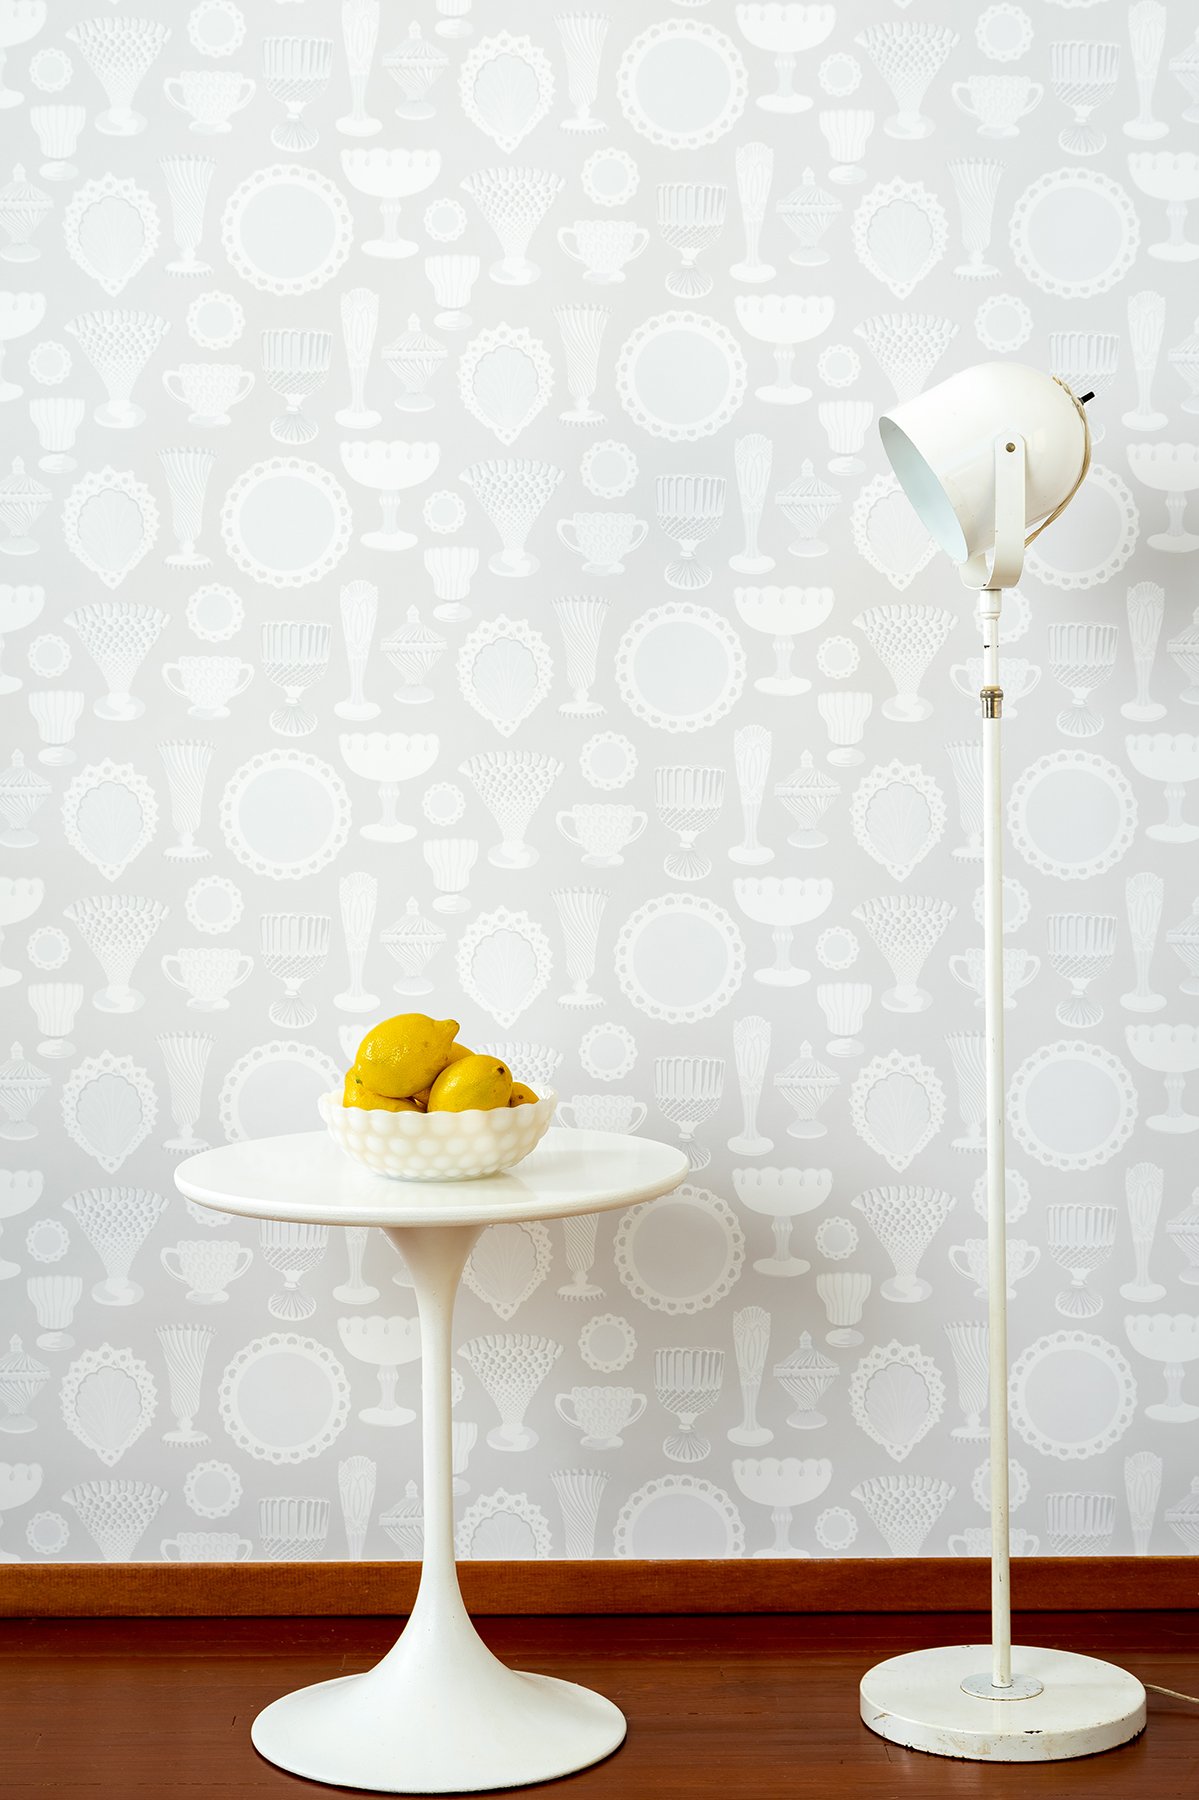 Kate Golding Milk Glass Putty wallpaper // Modern wallcoverings and interior decor.